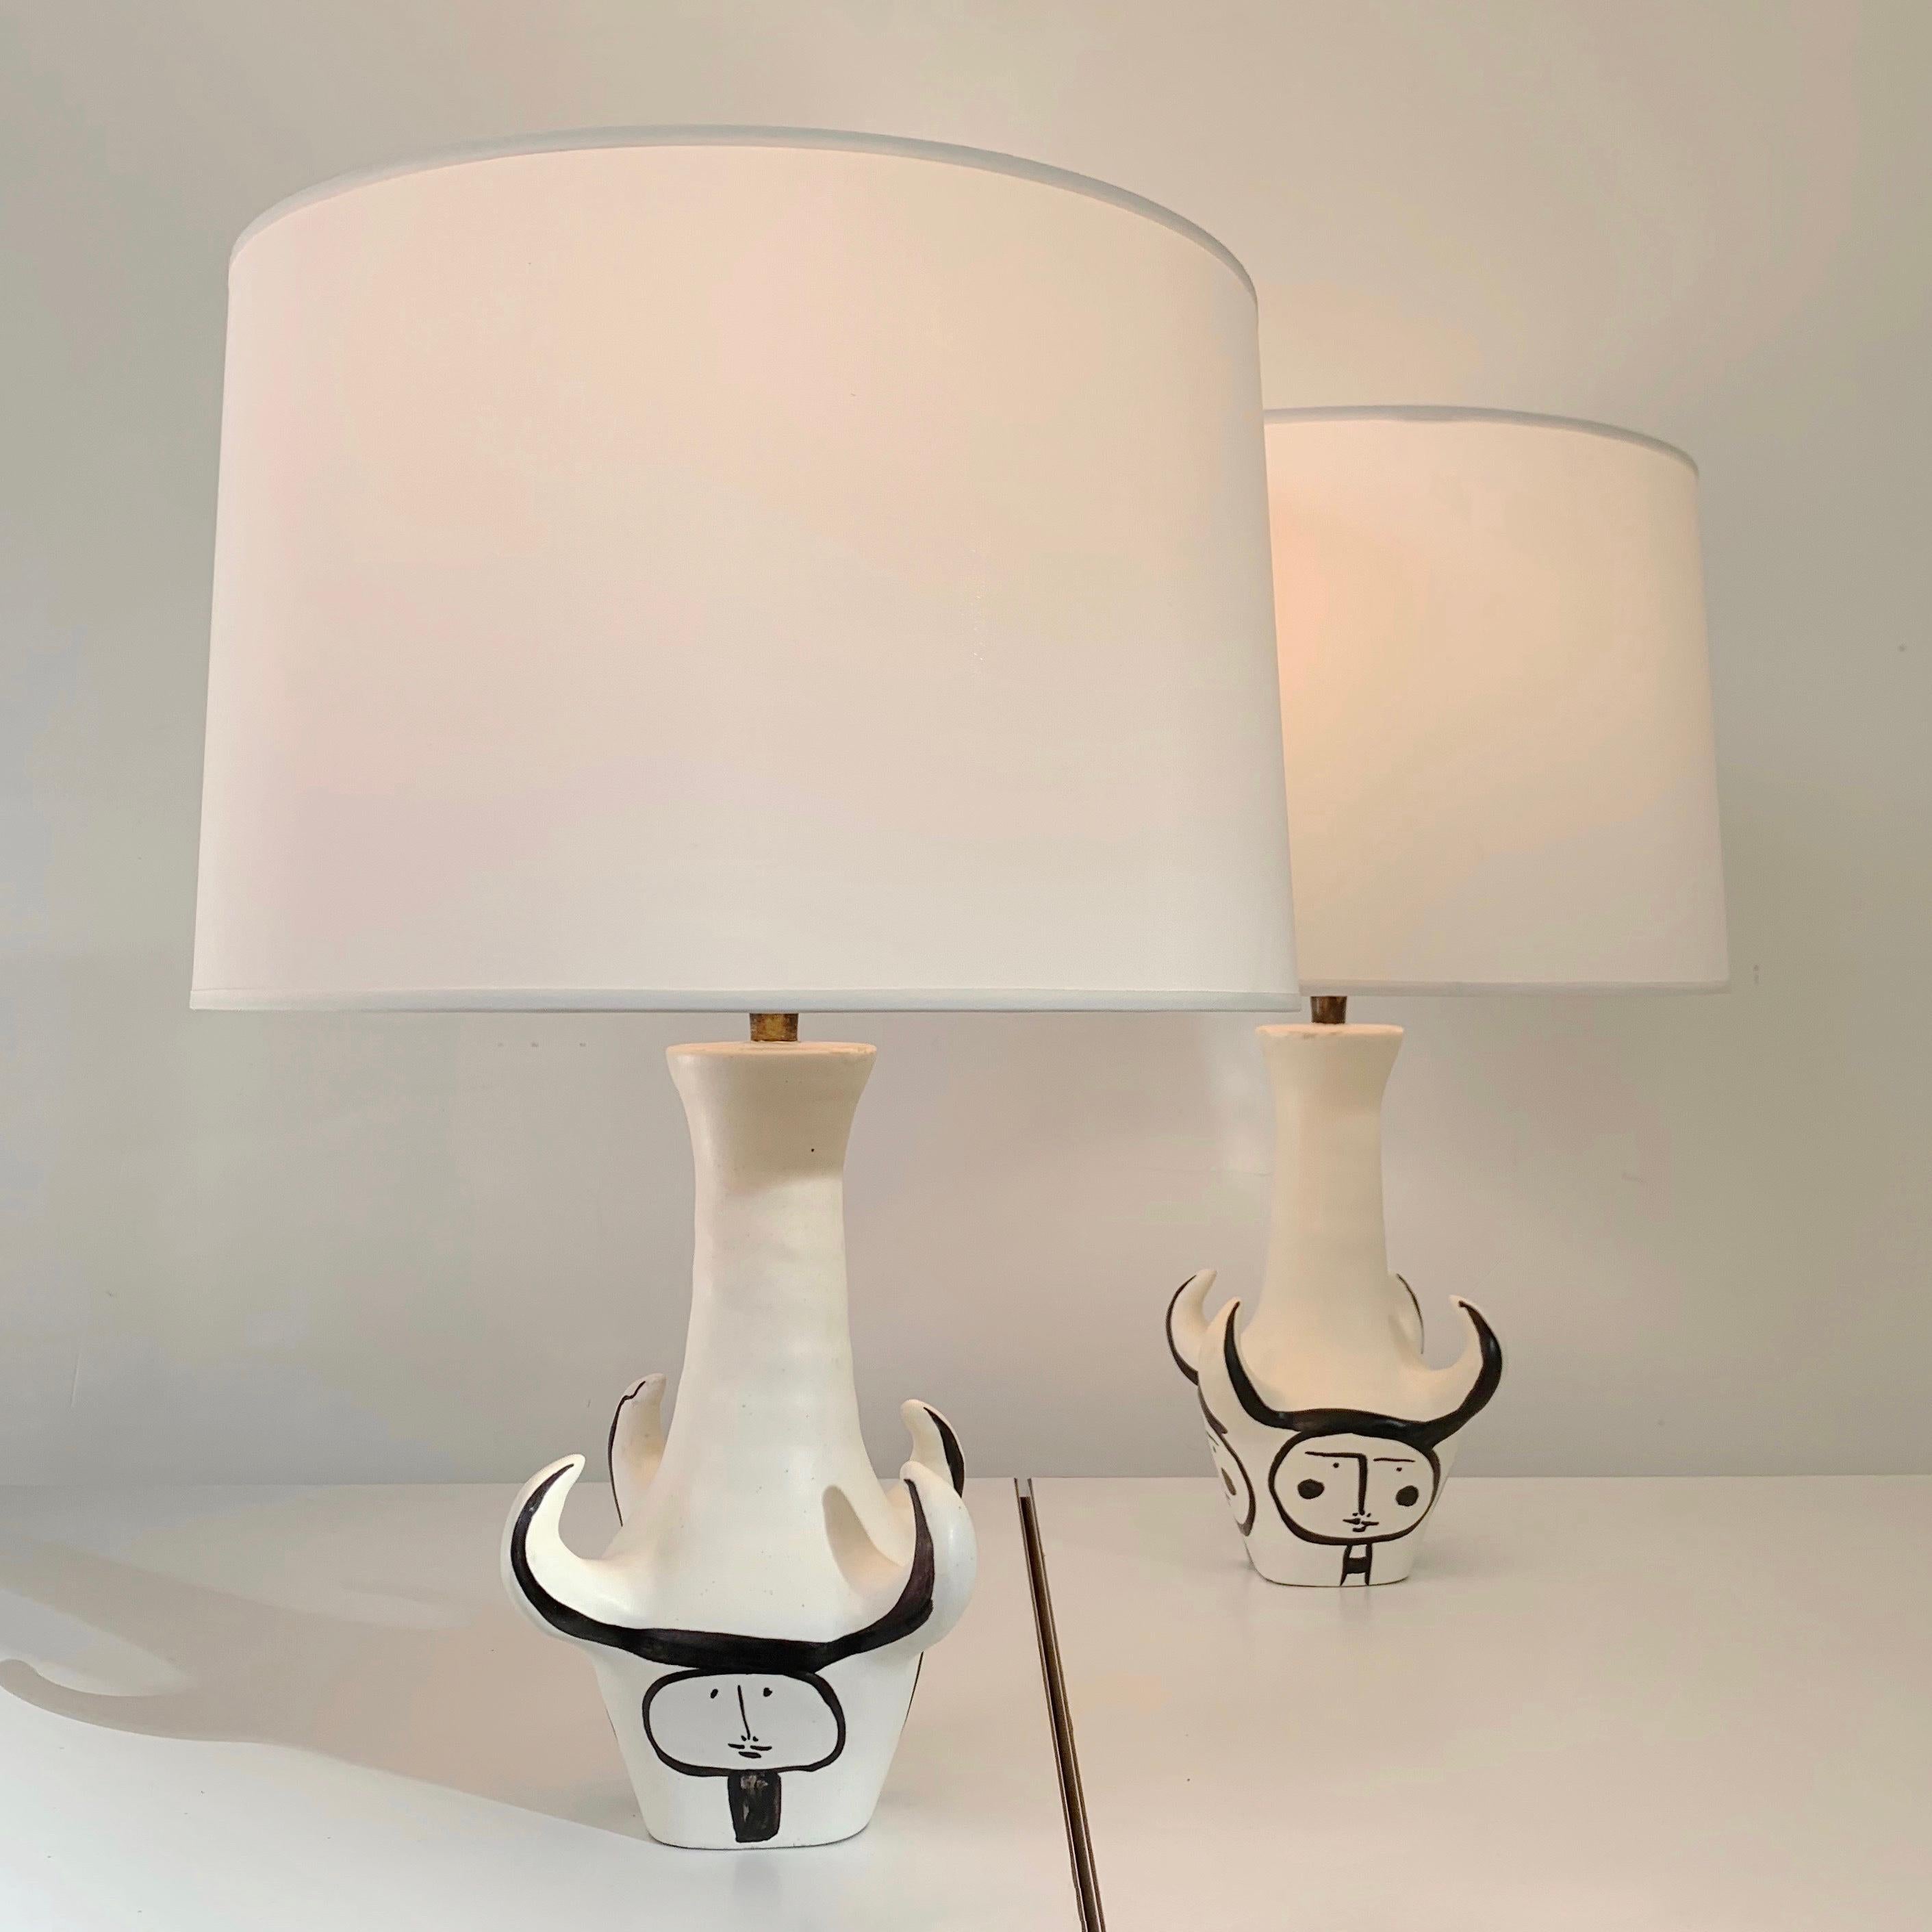 Mid-Century Modern  Roger Capron Pair Of 4 Horns Signed Ceramic Table Lamps , circa 1955, France. For Sale